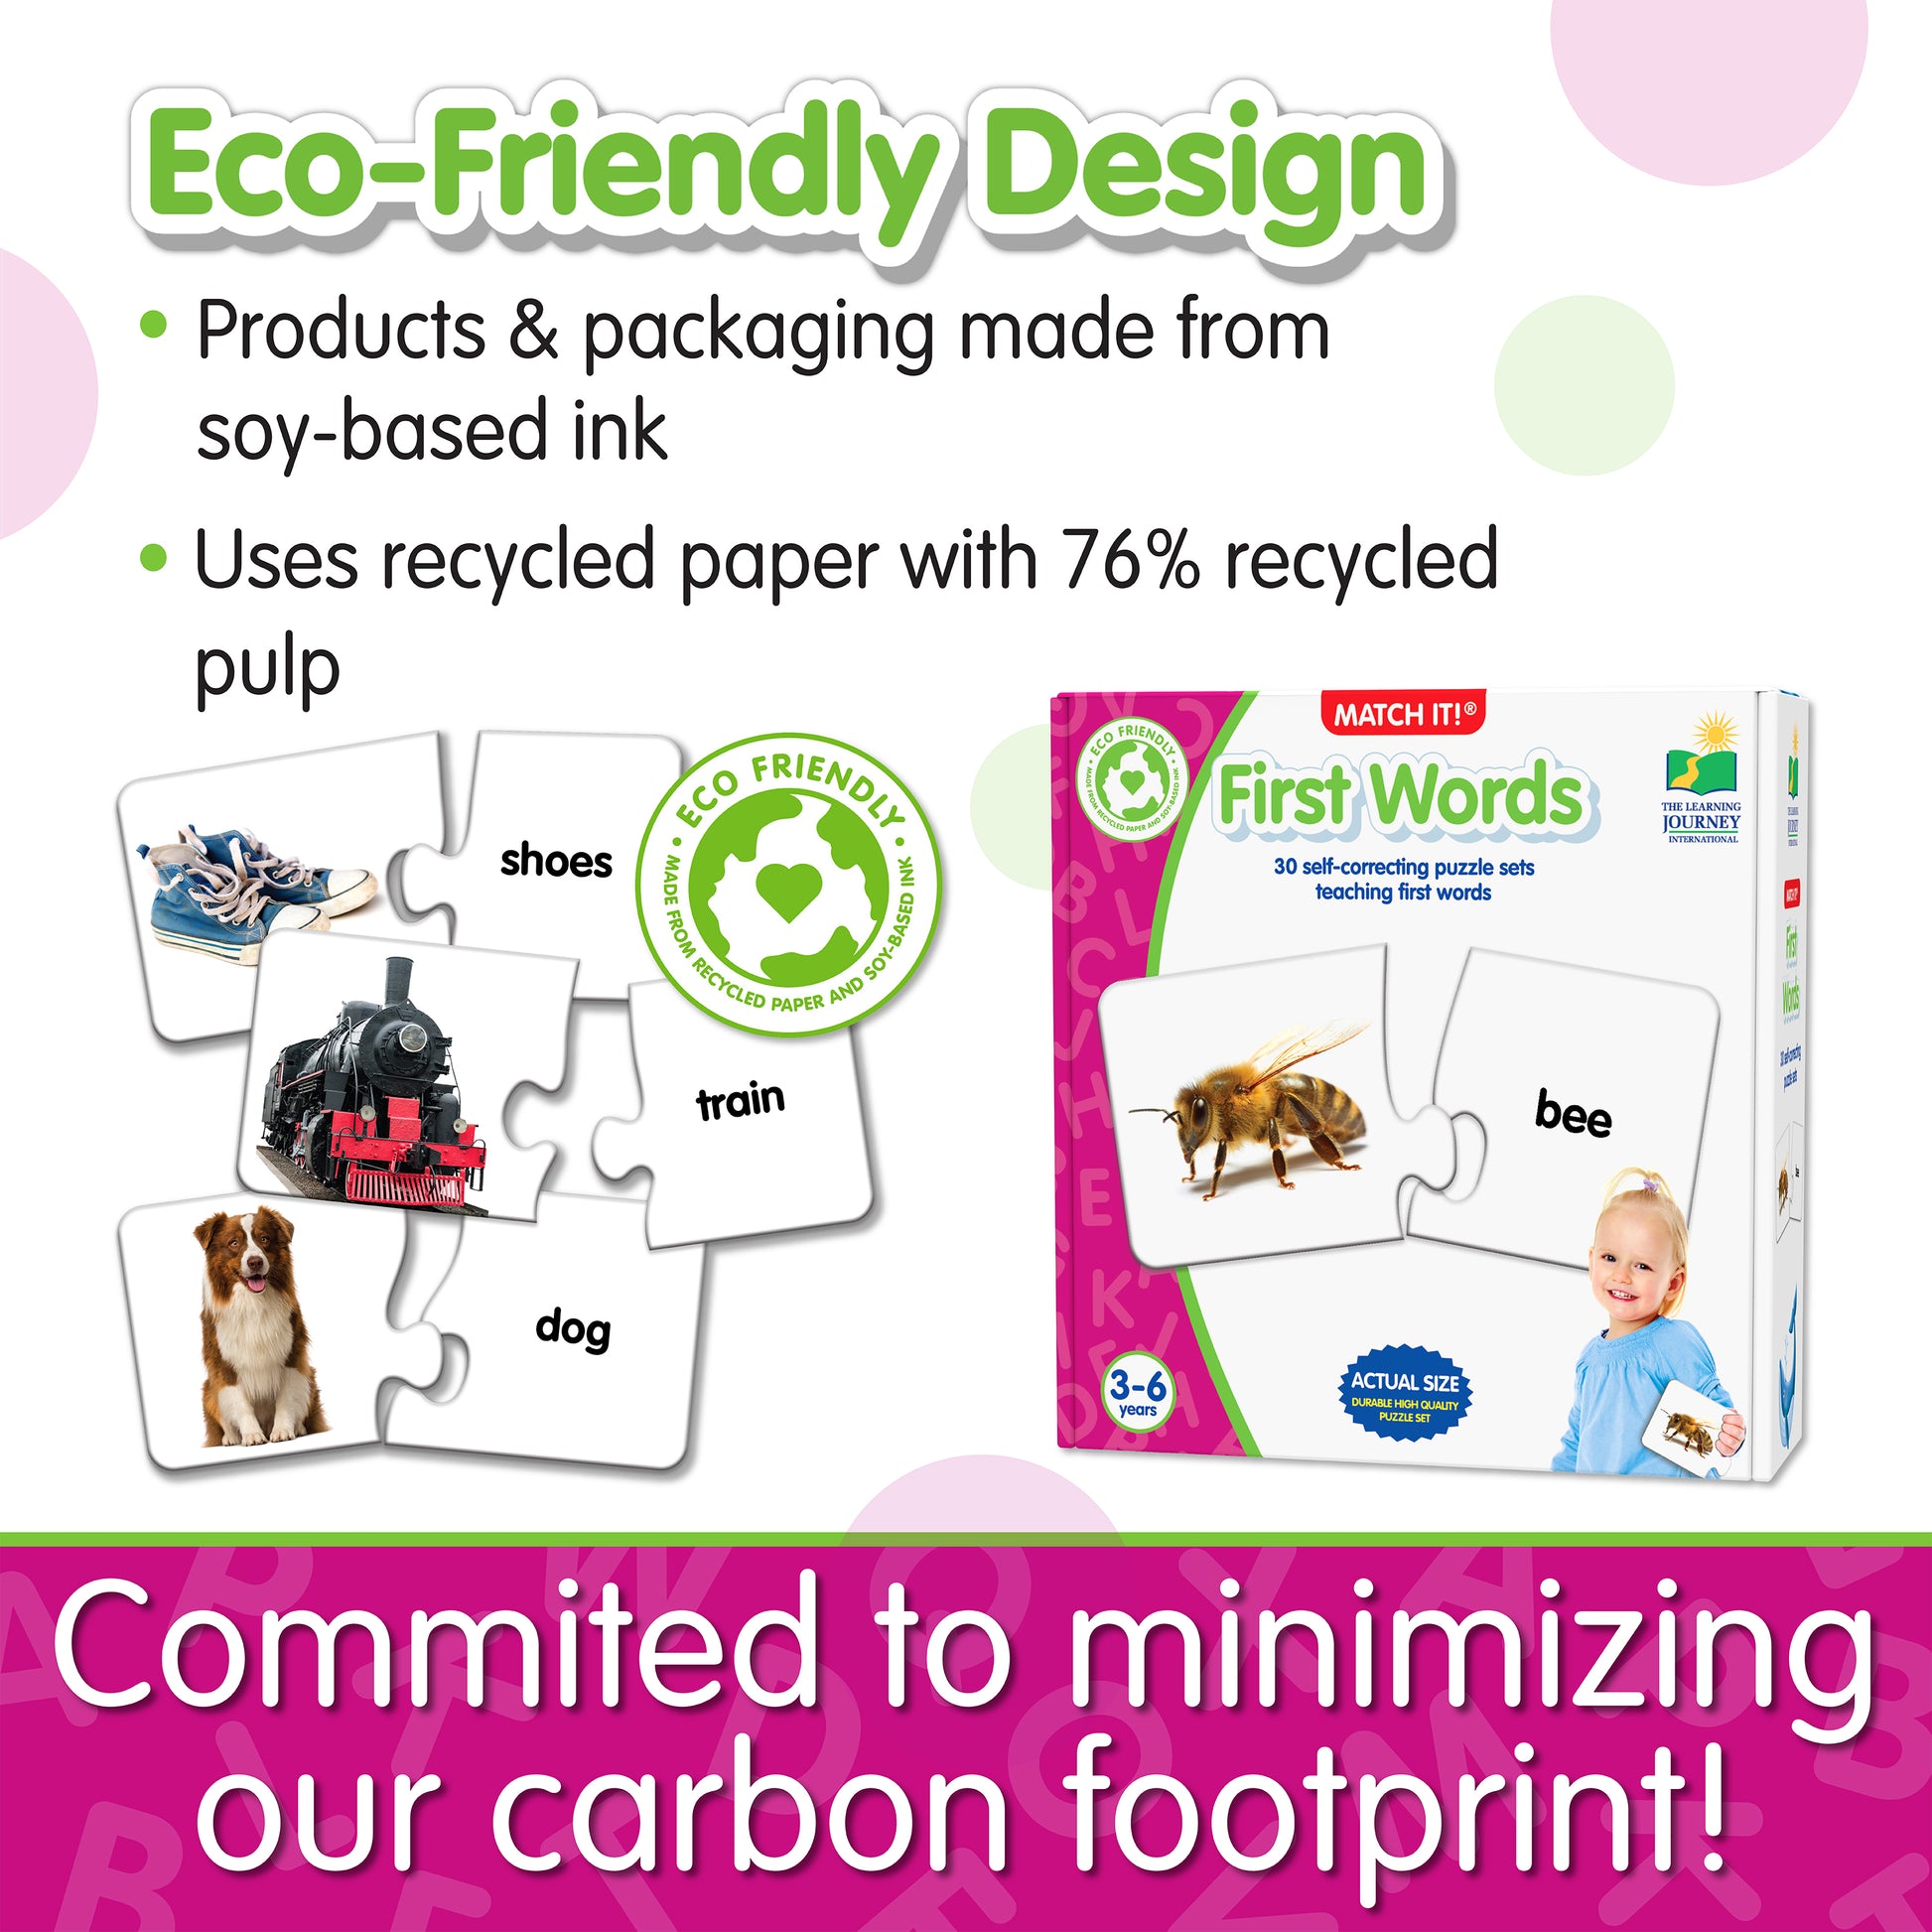 Infographic about Match It - First Words' eco-friendly design that says, "Committed to minimizing our carbon footprint!"